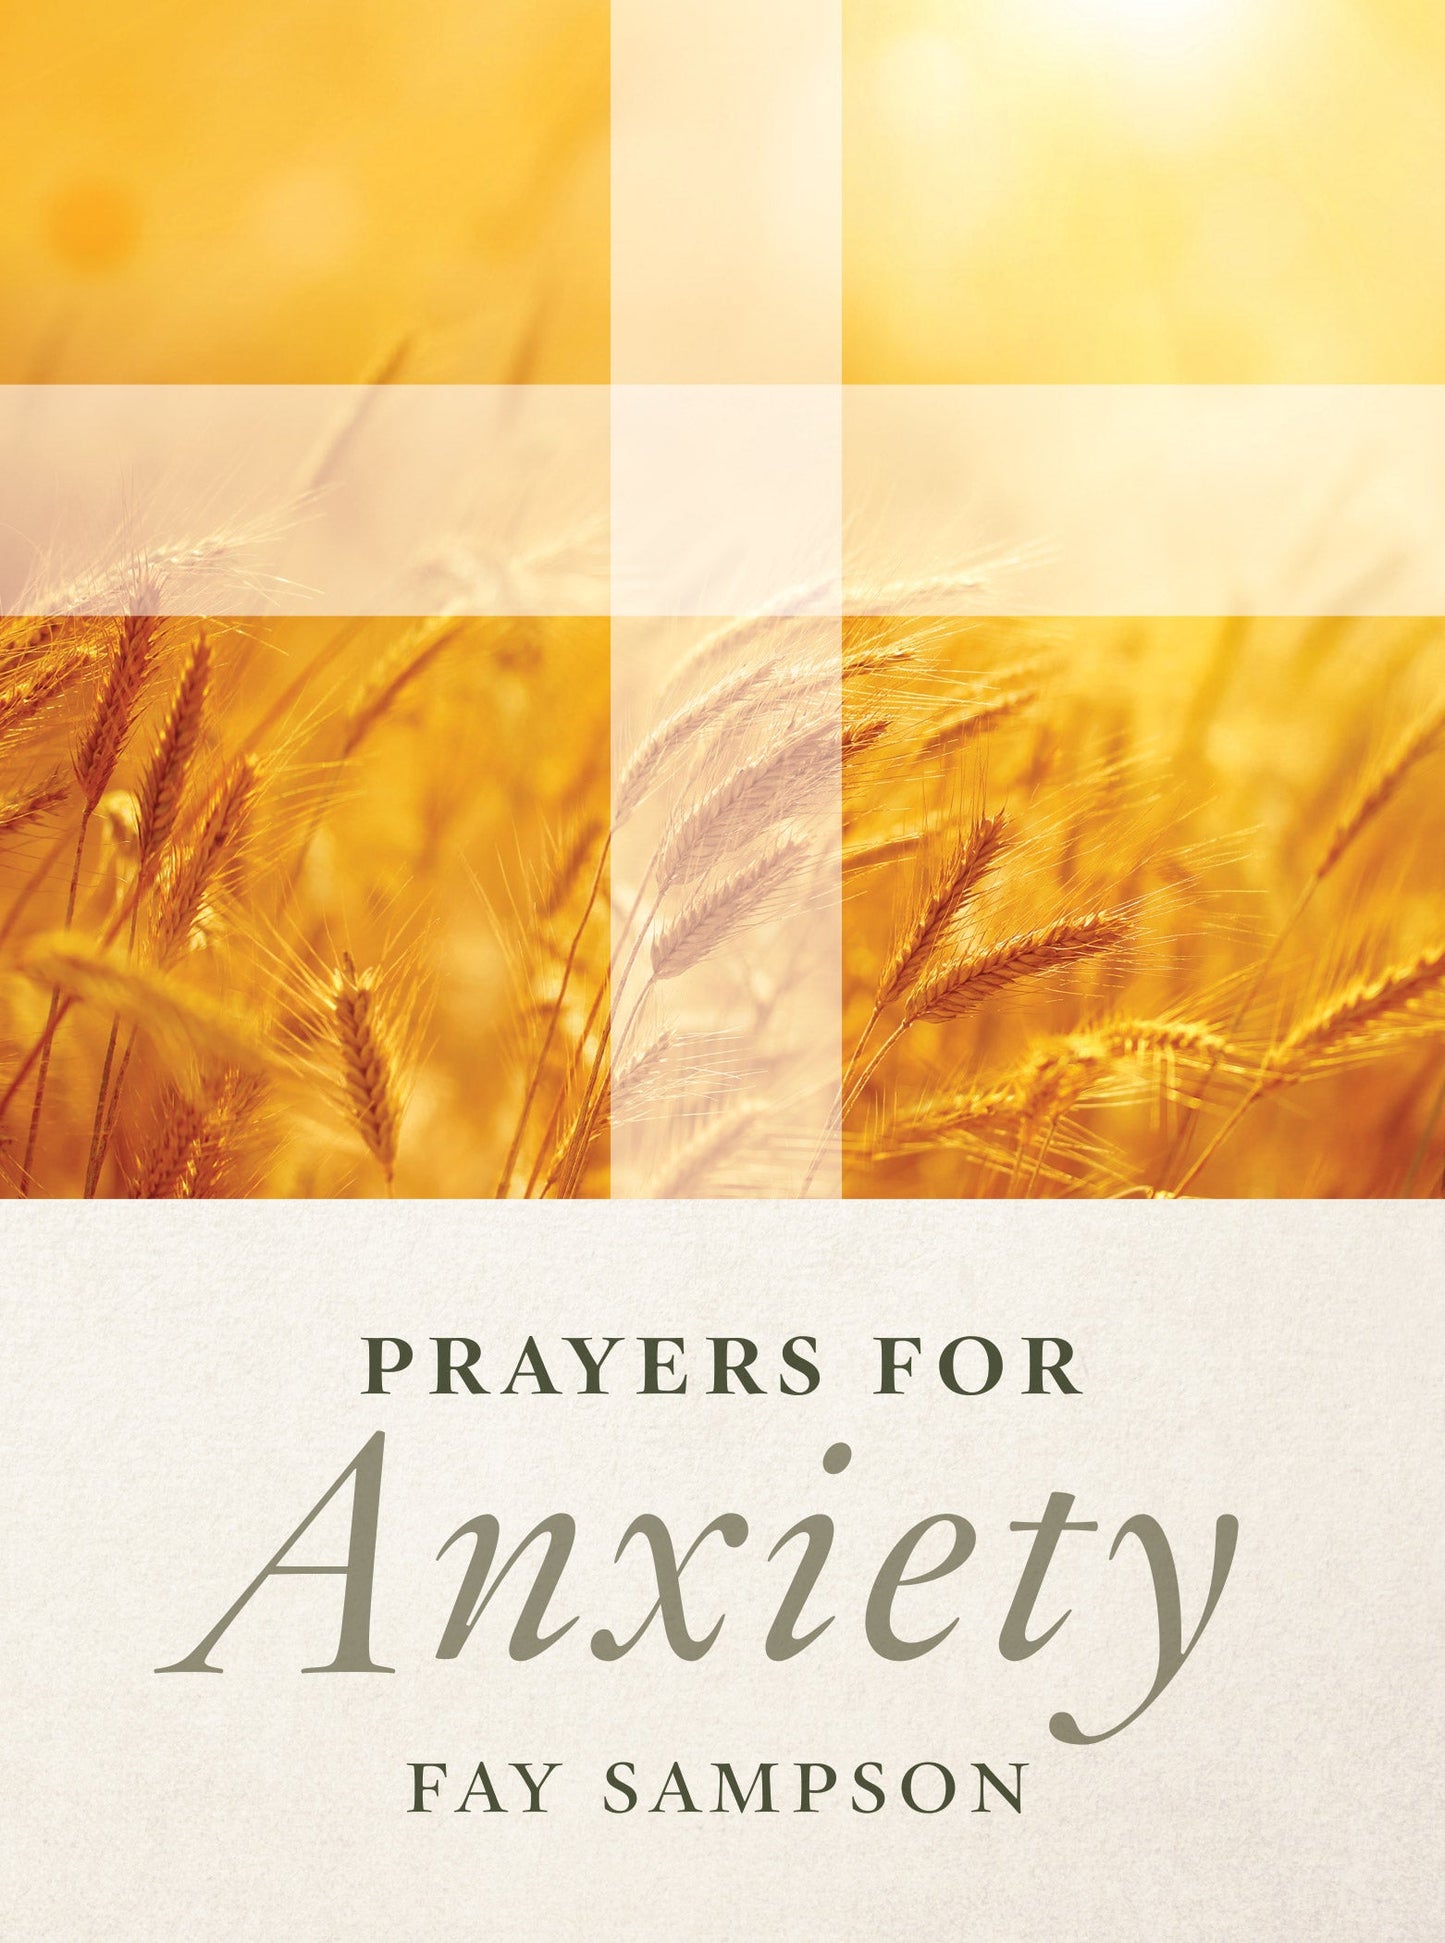 SALE - Prayers for Anxiety